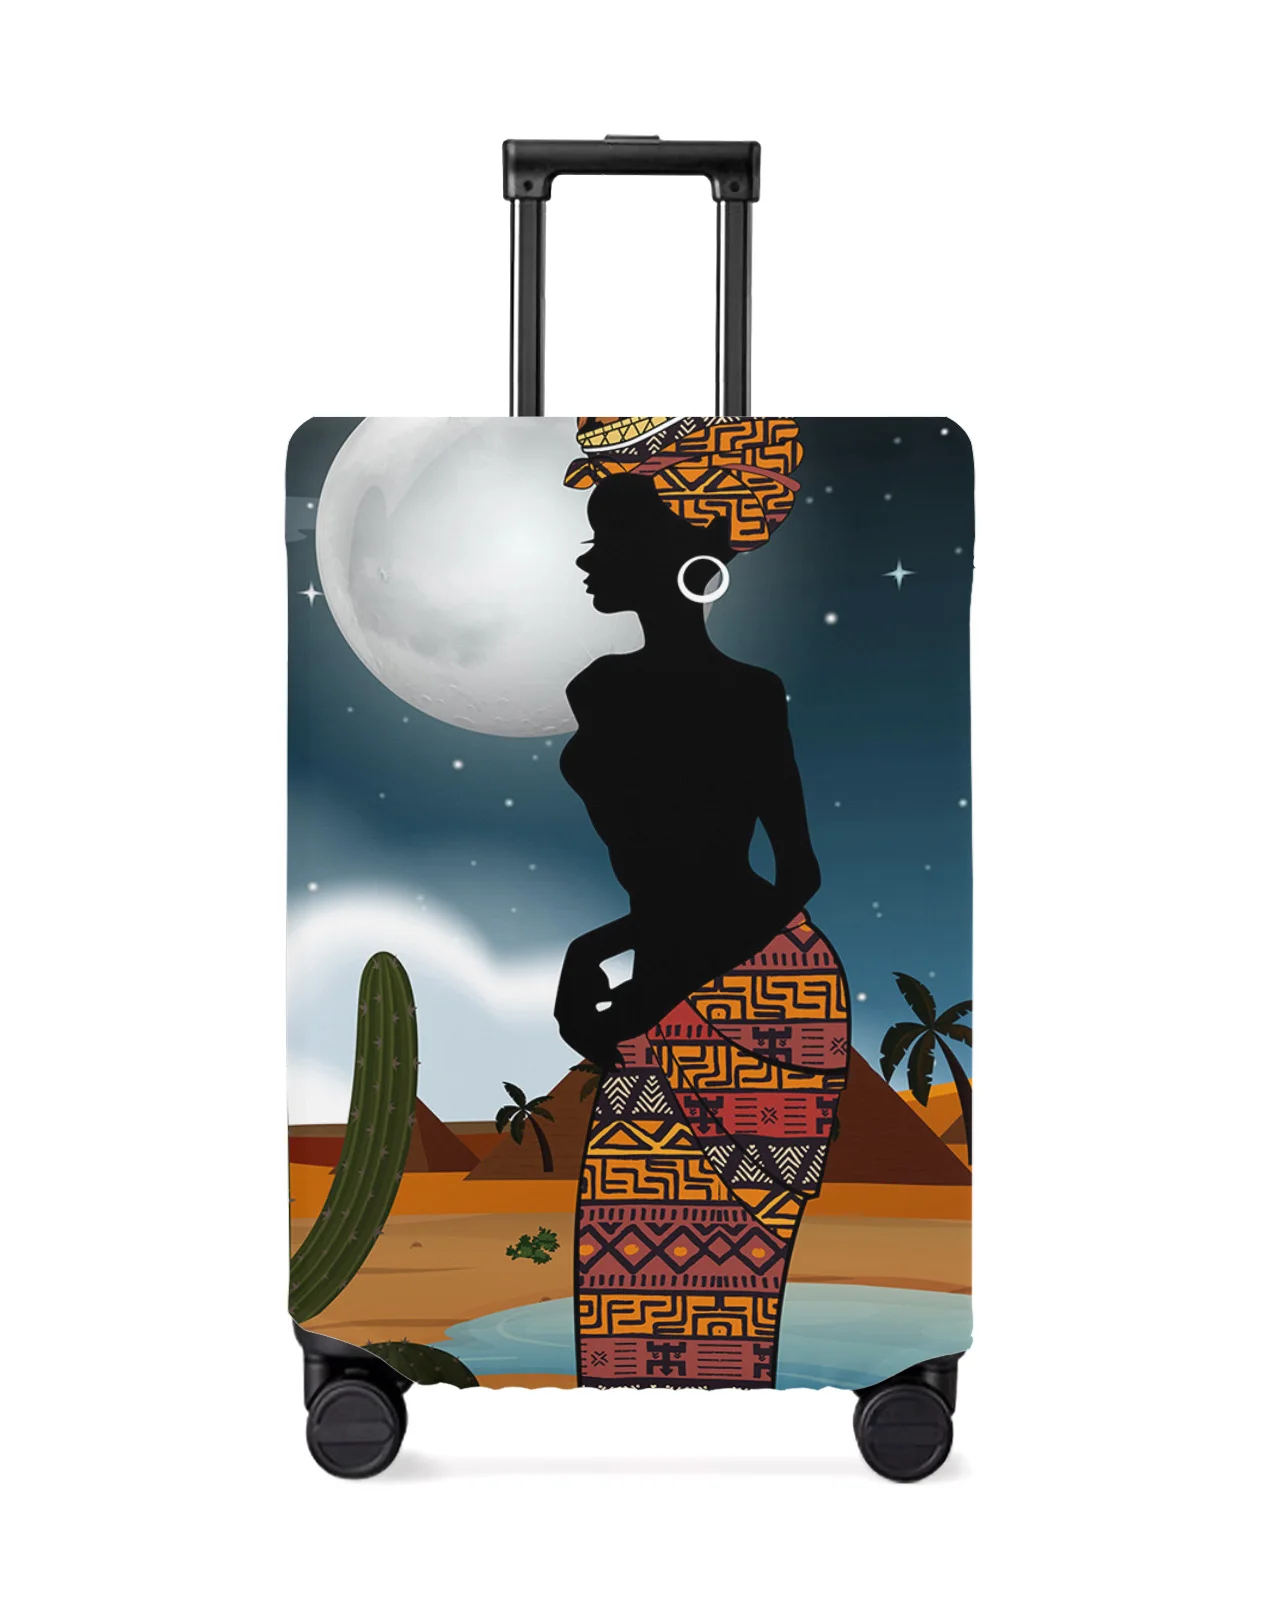 african-woman-desert-cactus-night-travel-luggage-protective-cover-travel-accessories-suitcase-elastic-dust-case-protect-sleeve